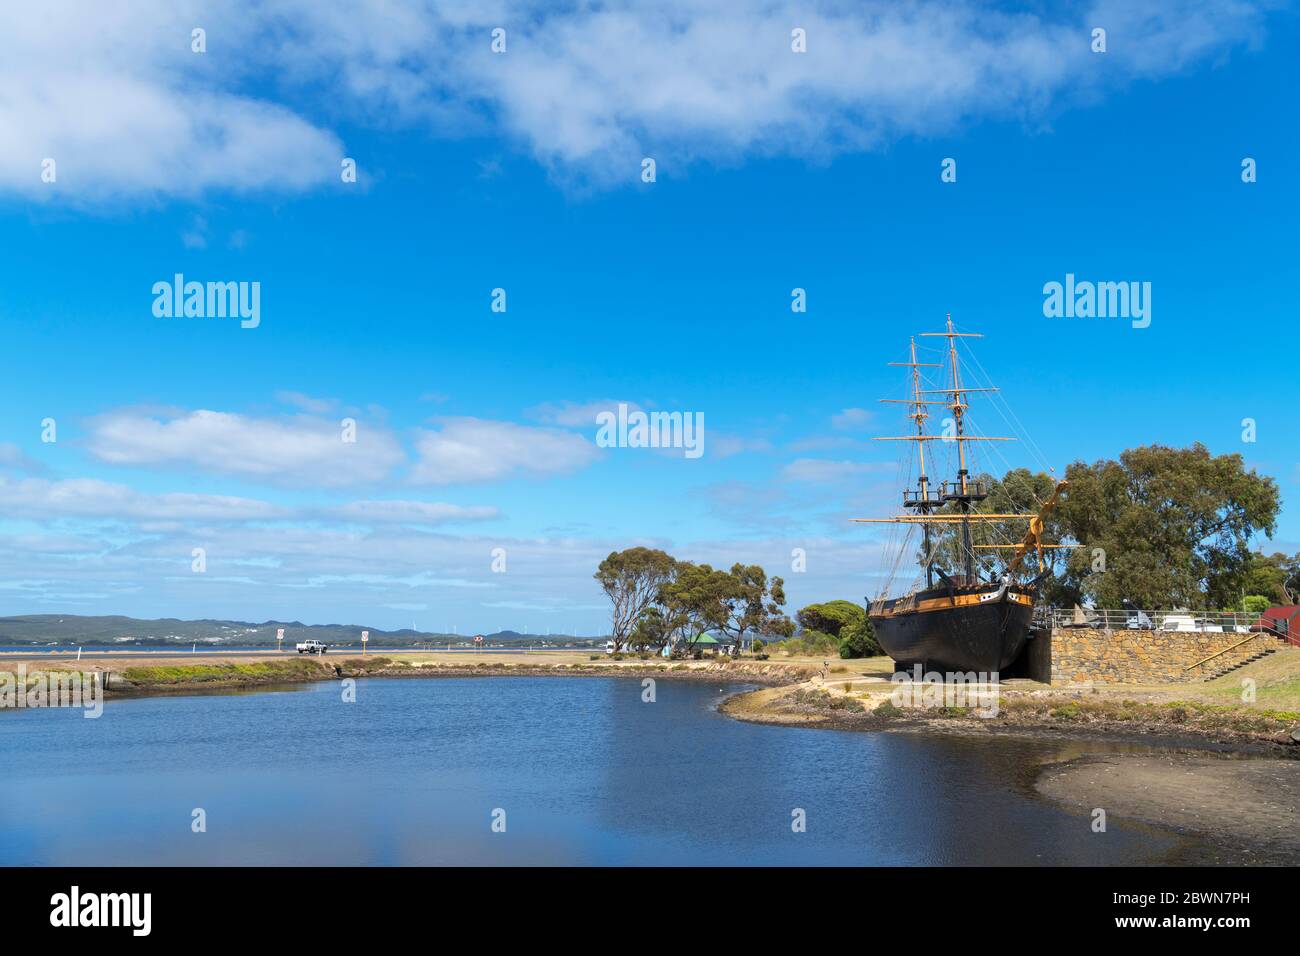 Replica of the brig 'Amity', which brought the first Europeans to Western Australia in 1826, Albany, Western Australia, Australia Stock Photo